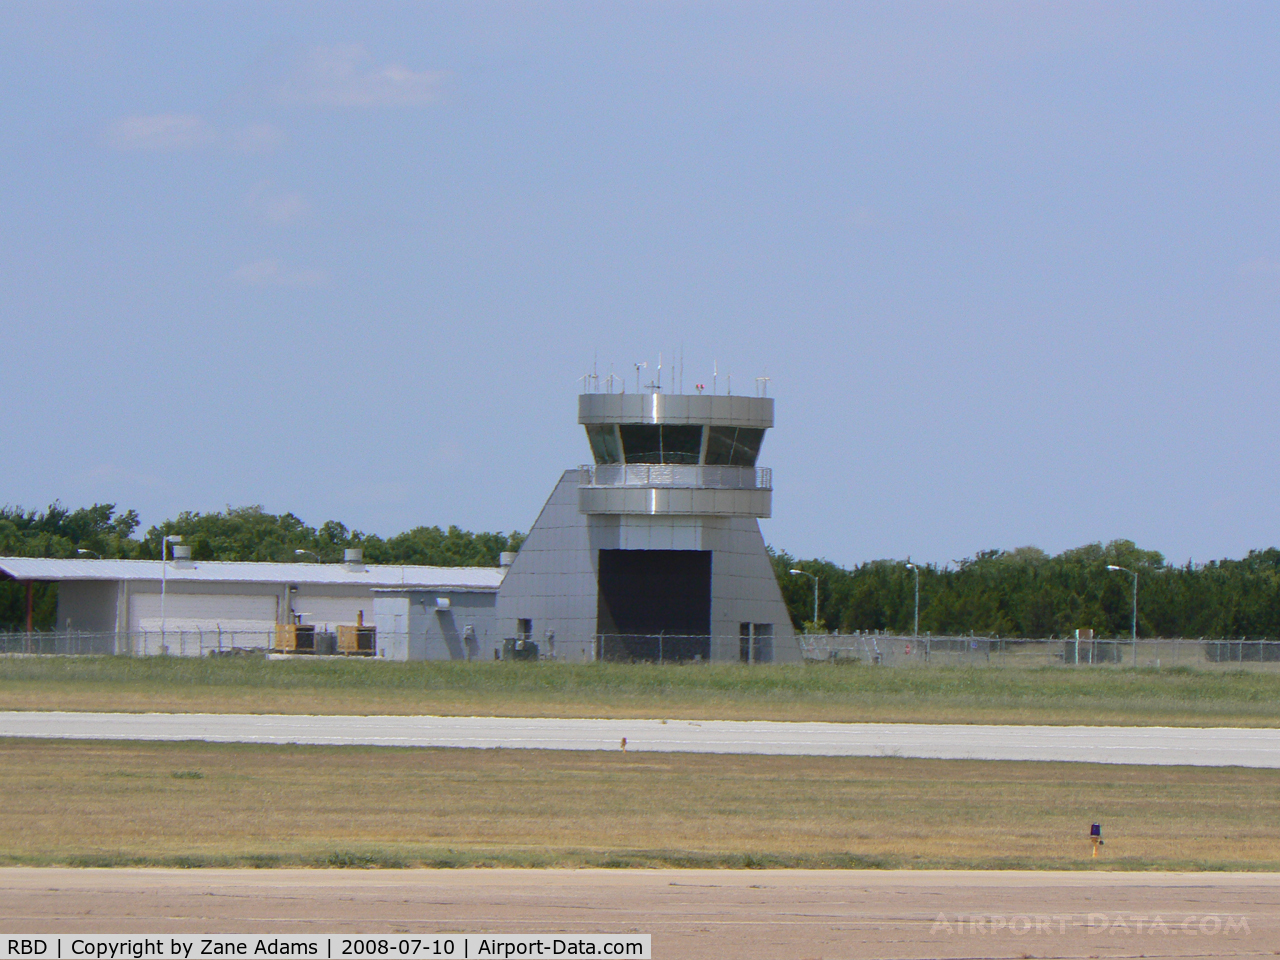 Dallas Executive Airport (RBD) - The new control tower at Dallas Executive (Redbird) Airport ..classic terminal torn down in 2006